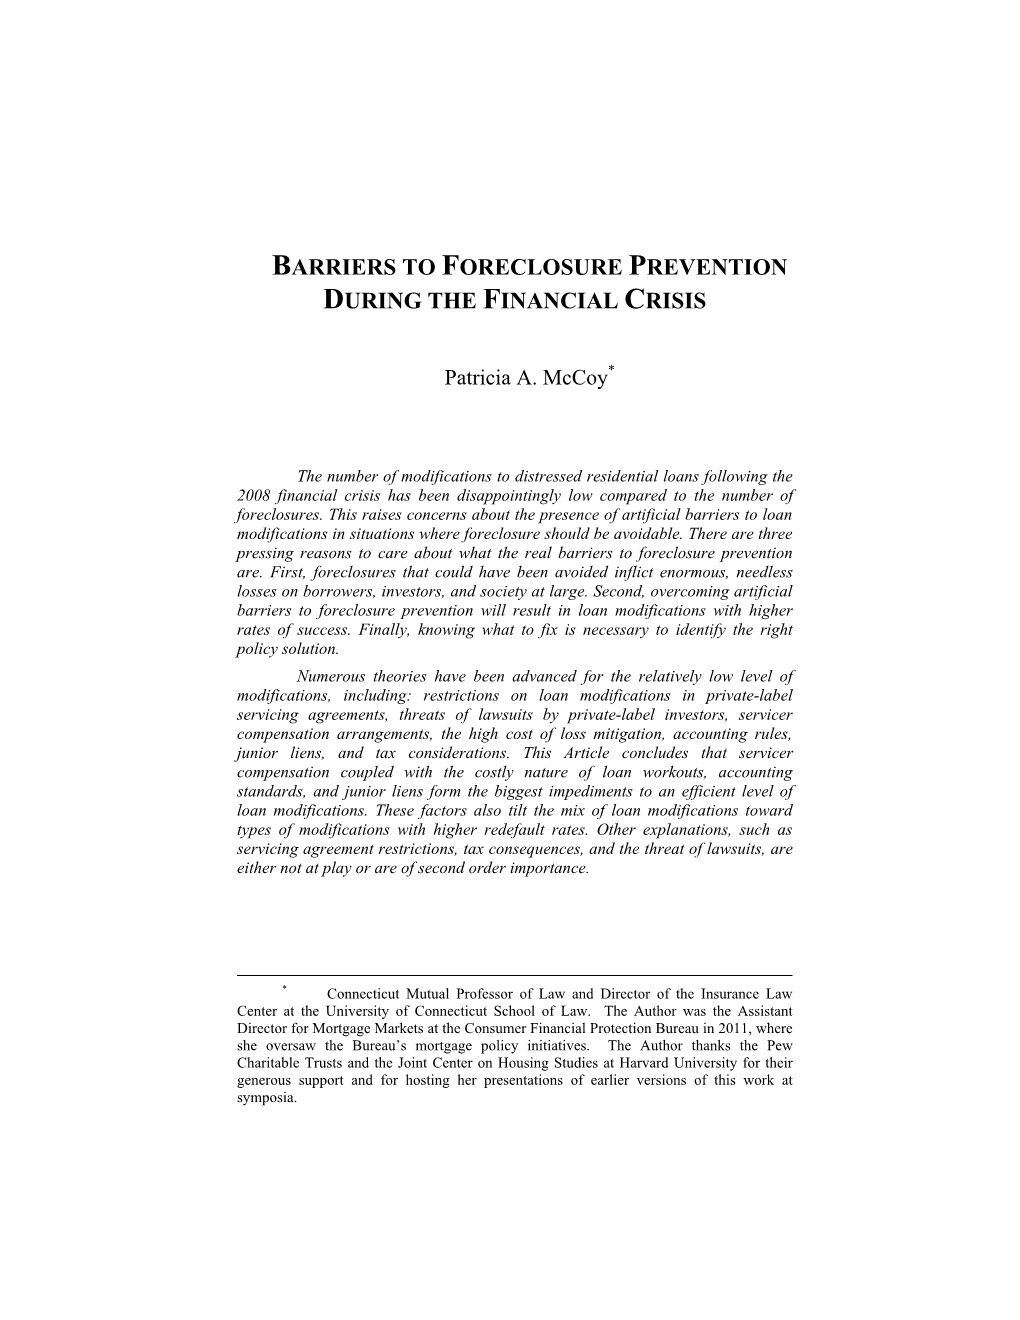 Barriers to Foreclosure Prevention During the Financial Crisis